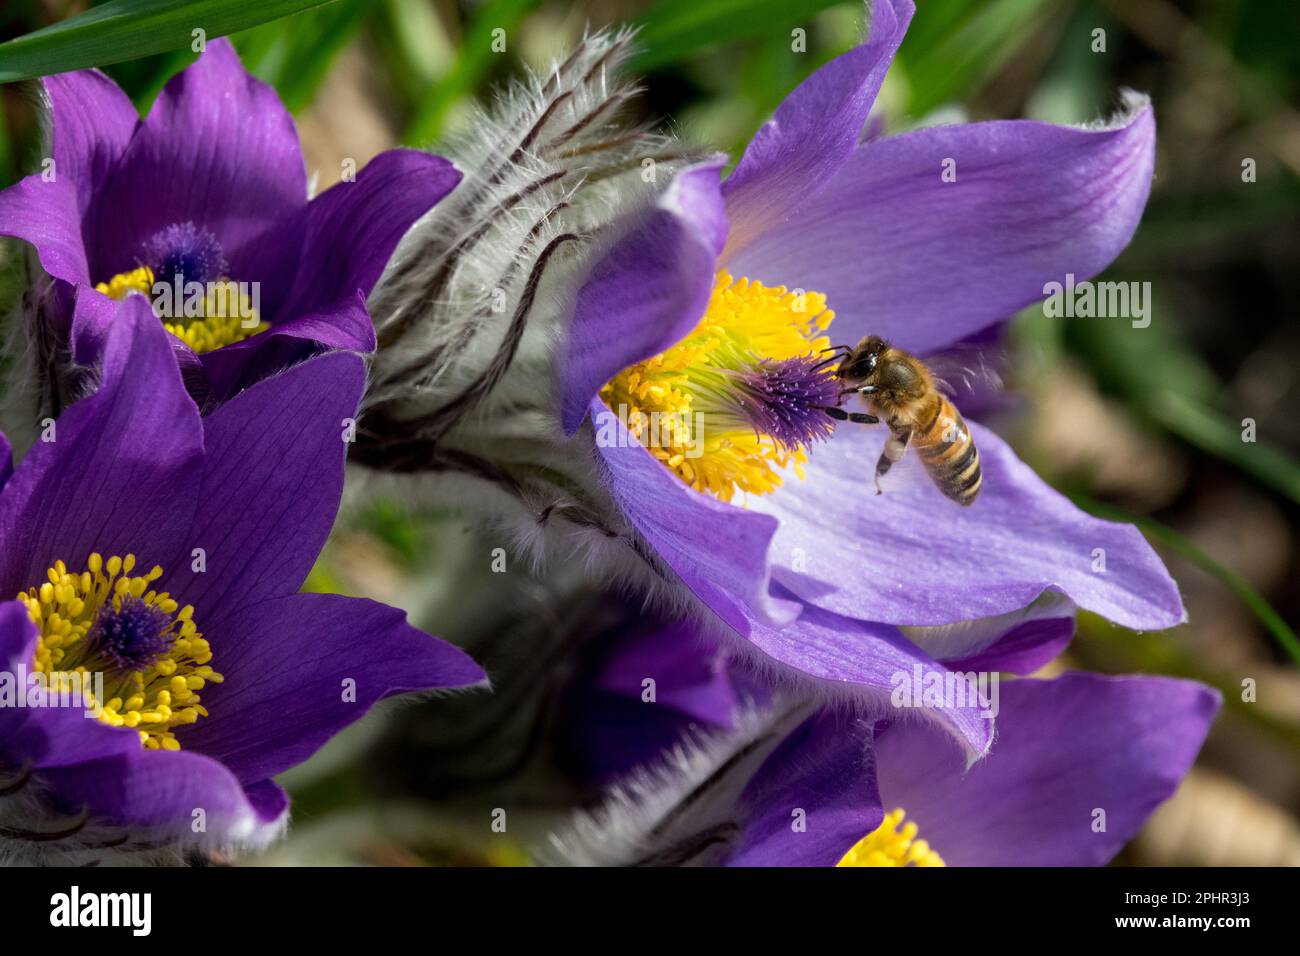 Pasque flower, Insect, Pulsatilla, Flower, Honey bee, Closeup, Bee, Apis mellifera, Bee-friendly, Plant in spring Stock Photo